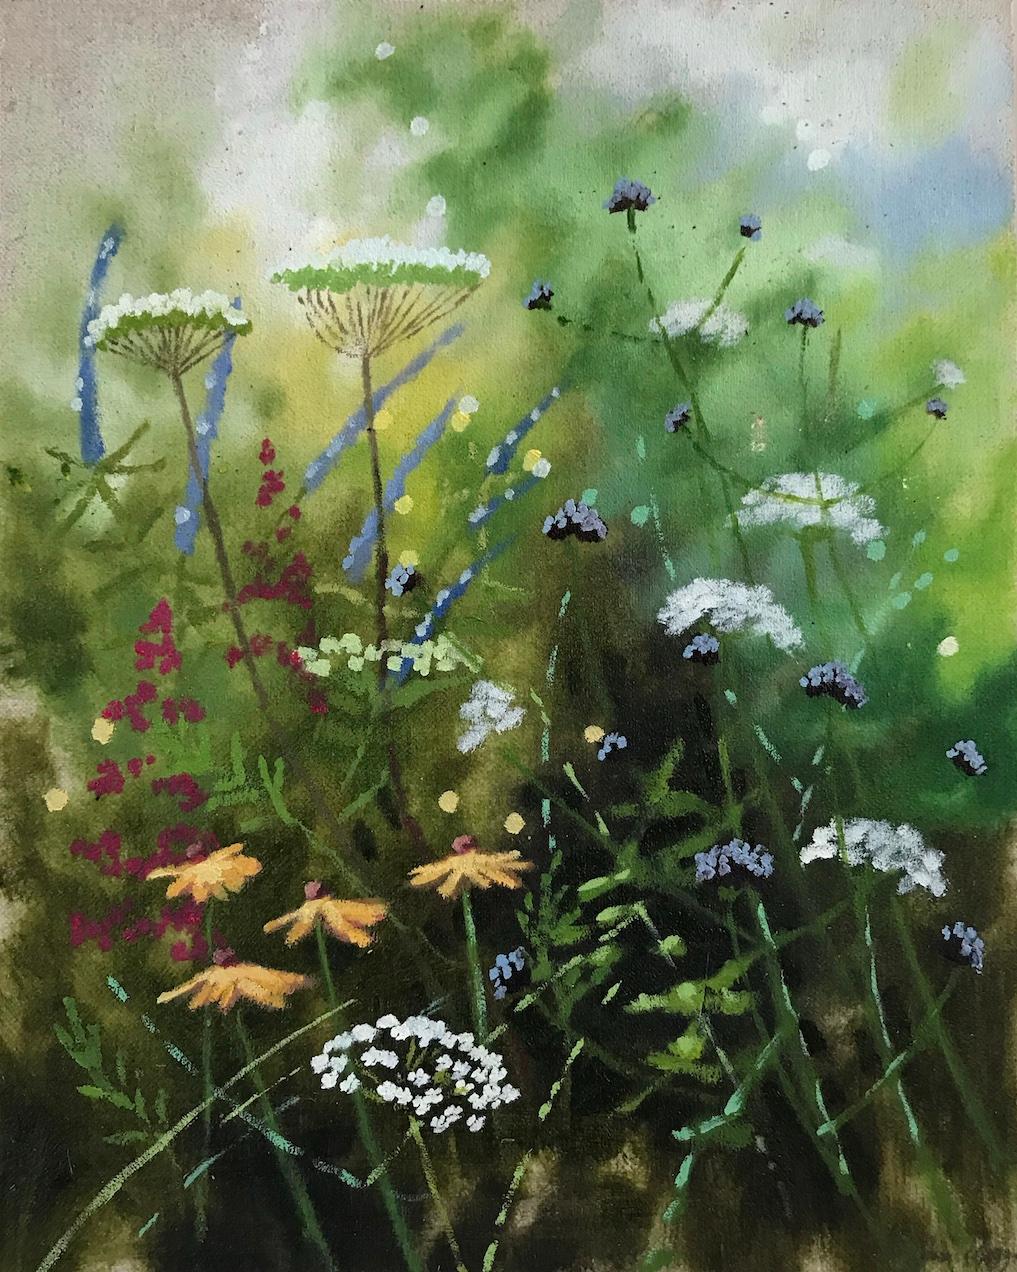 Dylan Lloyd  Landscape Painting - Summer Garden Study II by Dylan Lloyd, Botanical painting, original oil painting